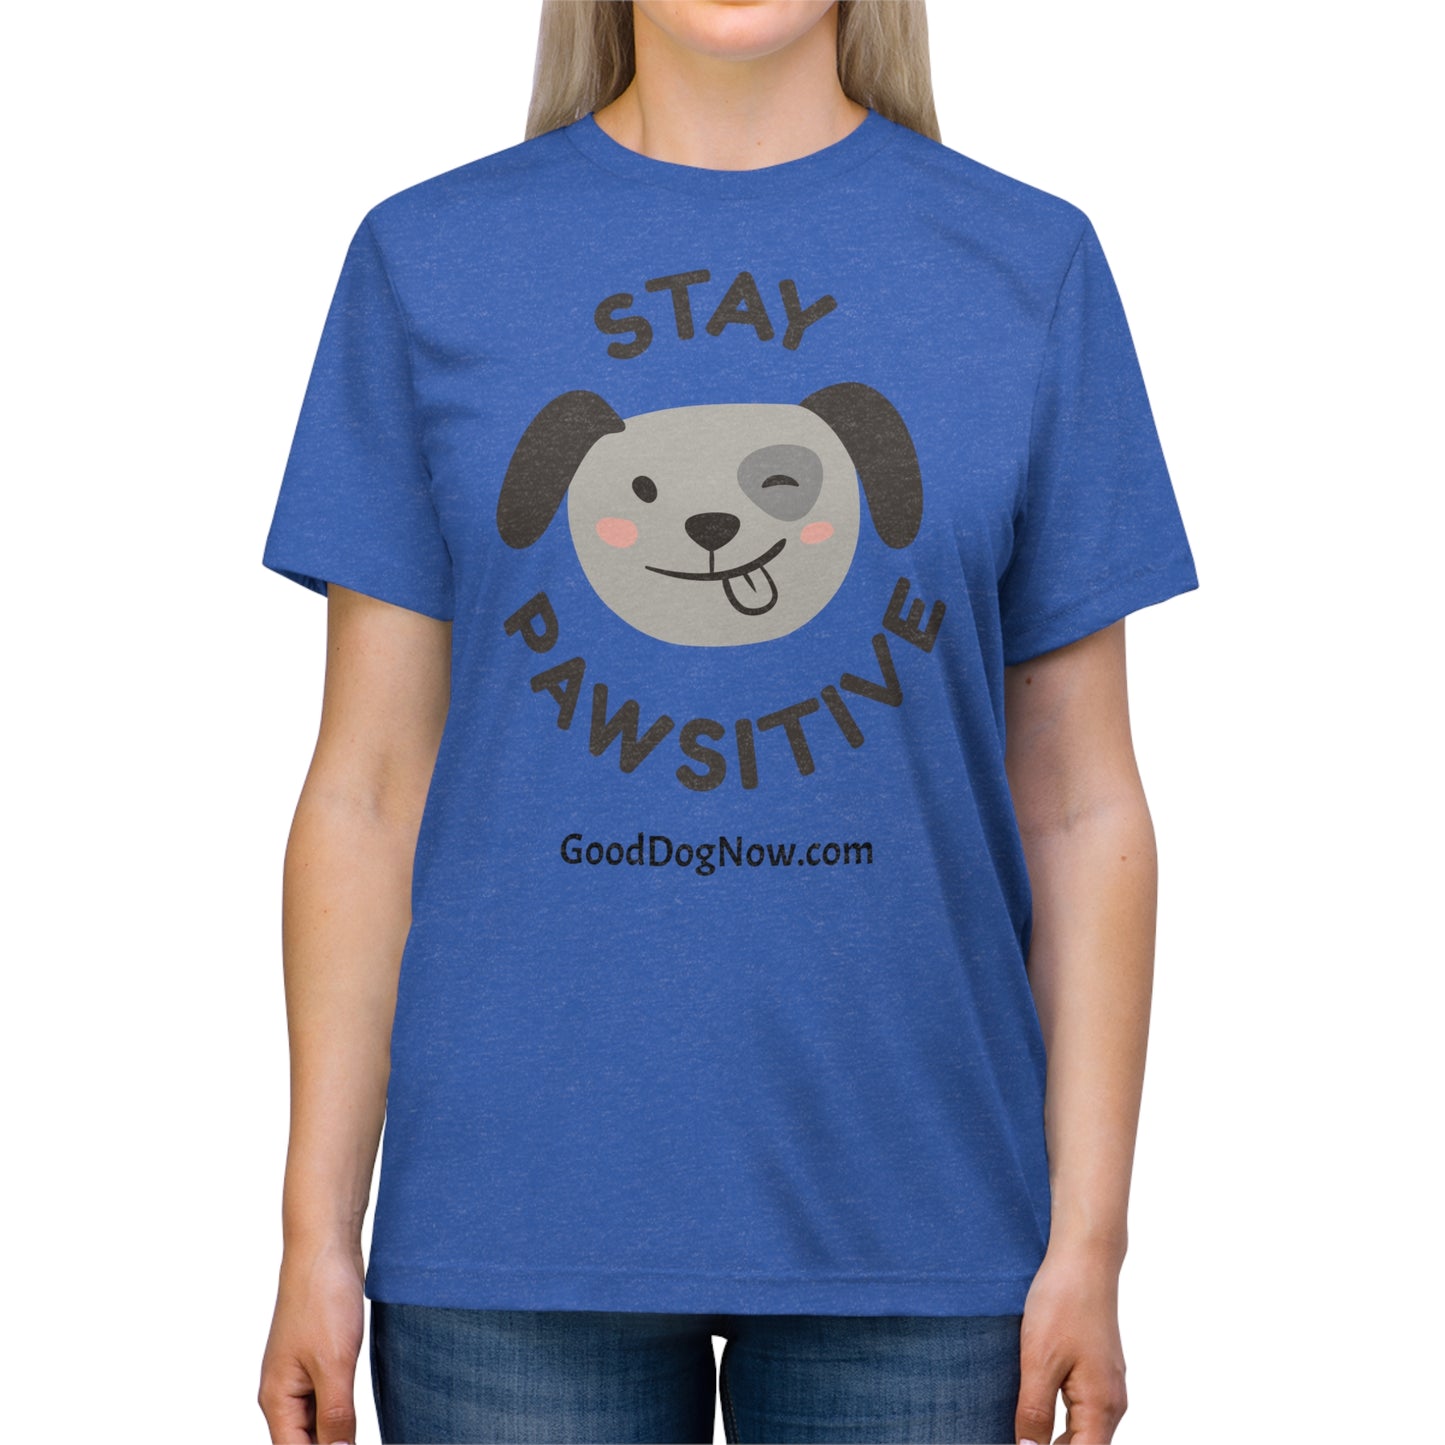 Unisex Triblend Tee - Stay Pawsitive